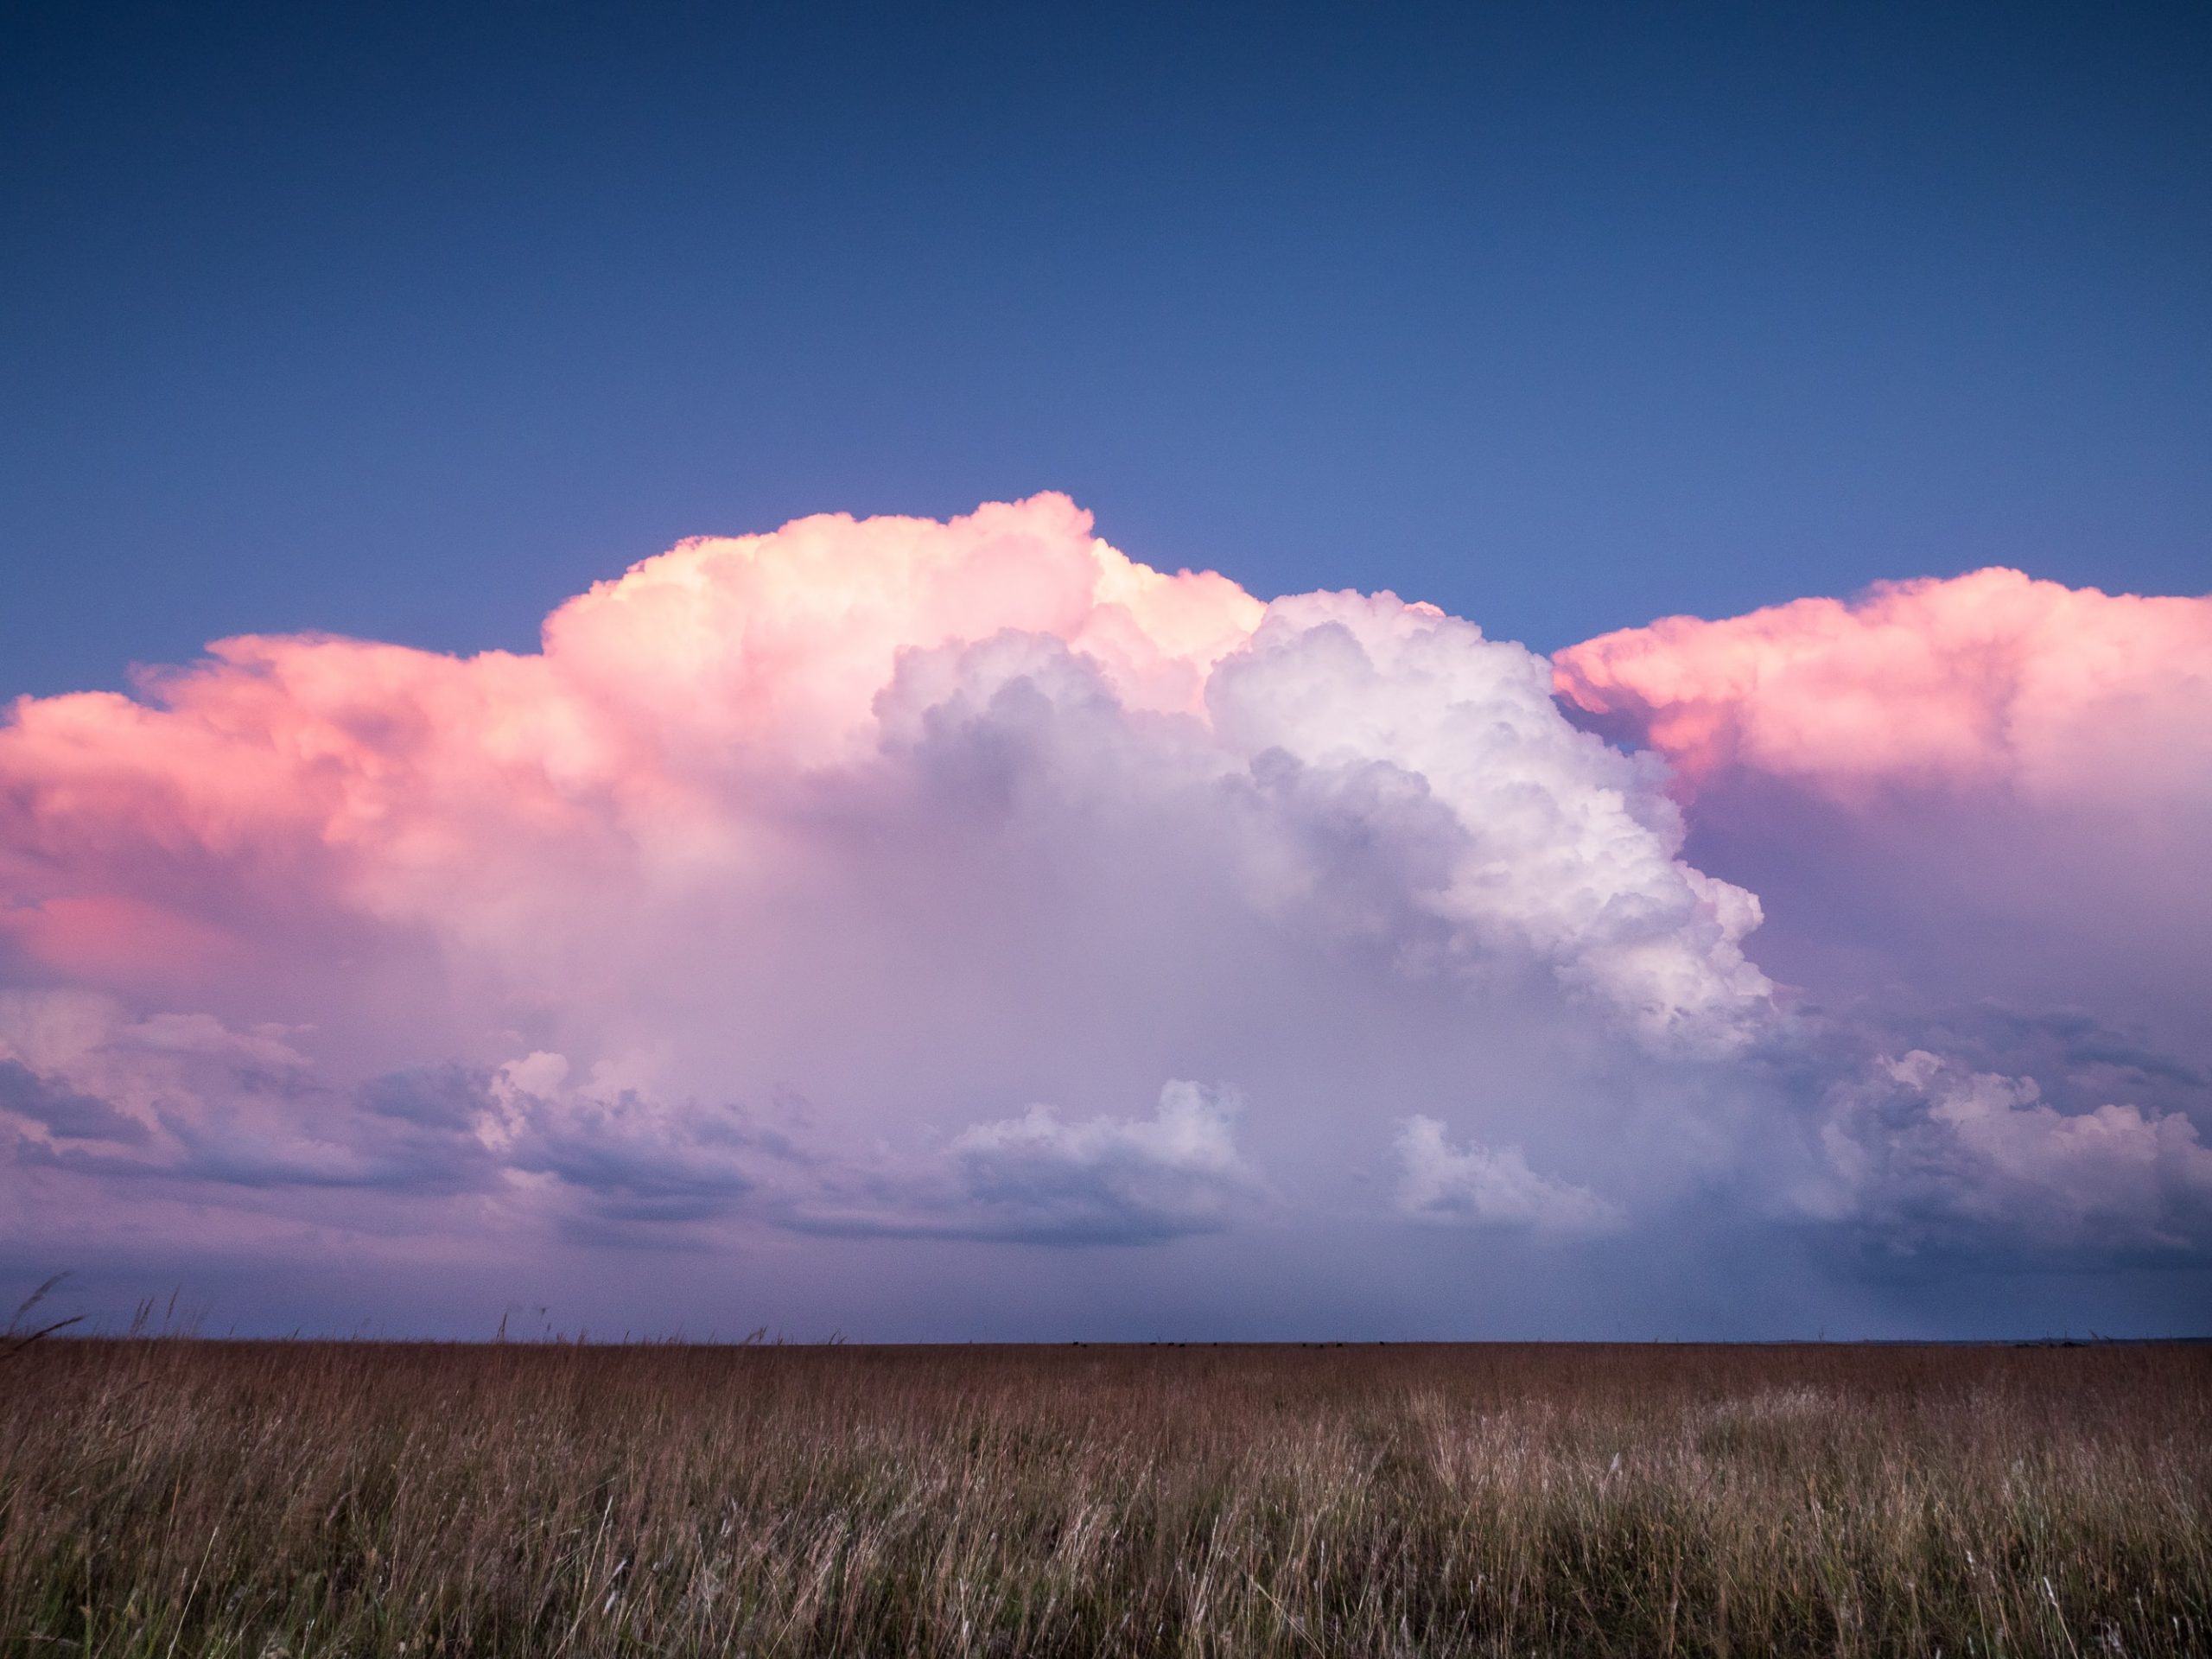 A photograph of a flat field of long brown grass. Overhead, the sky is a deep blue and is filled with great pink and purple fluffy clouds.